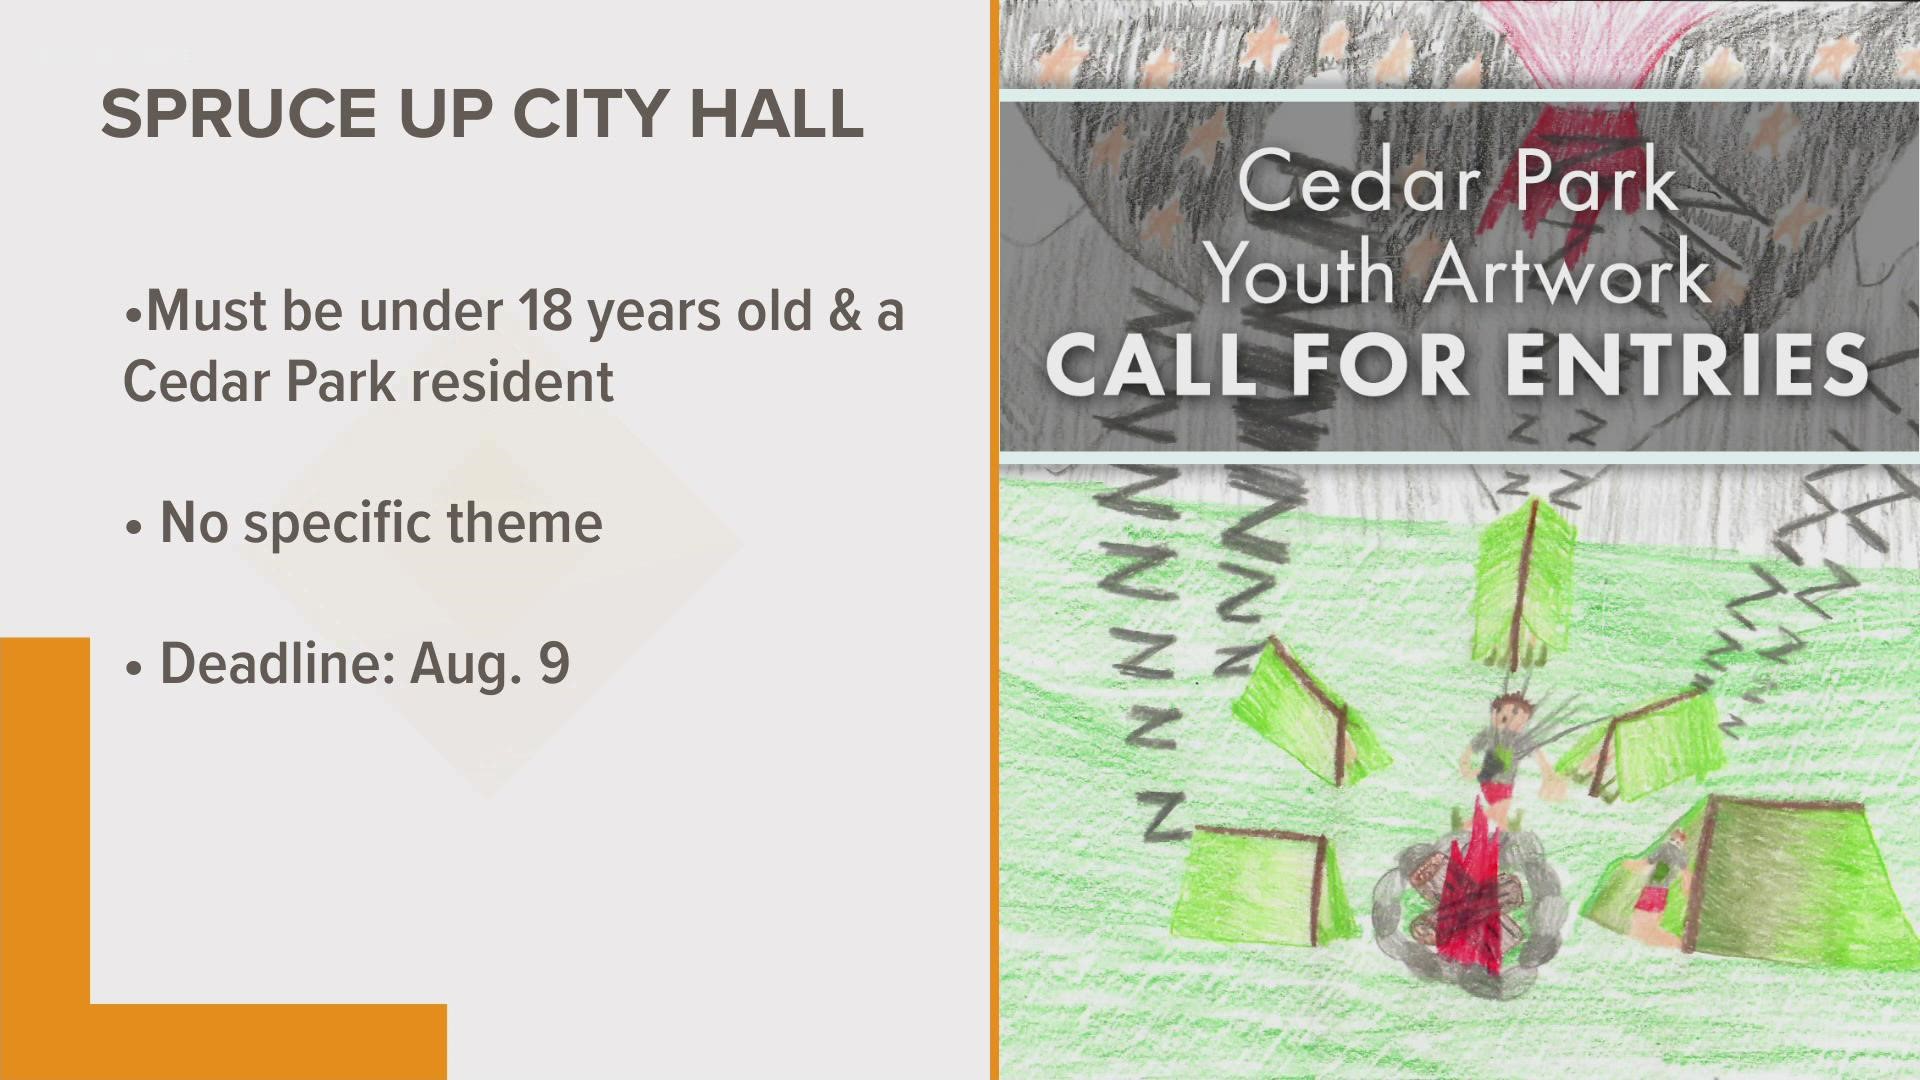 The City of Cedar Park wants to update the city hall main lobby with new artwork, so they're asking local kids under the age of 18 to submit their work.